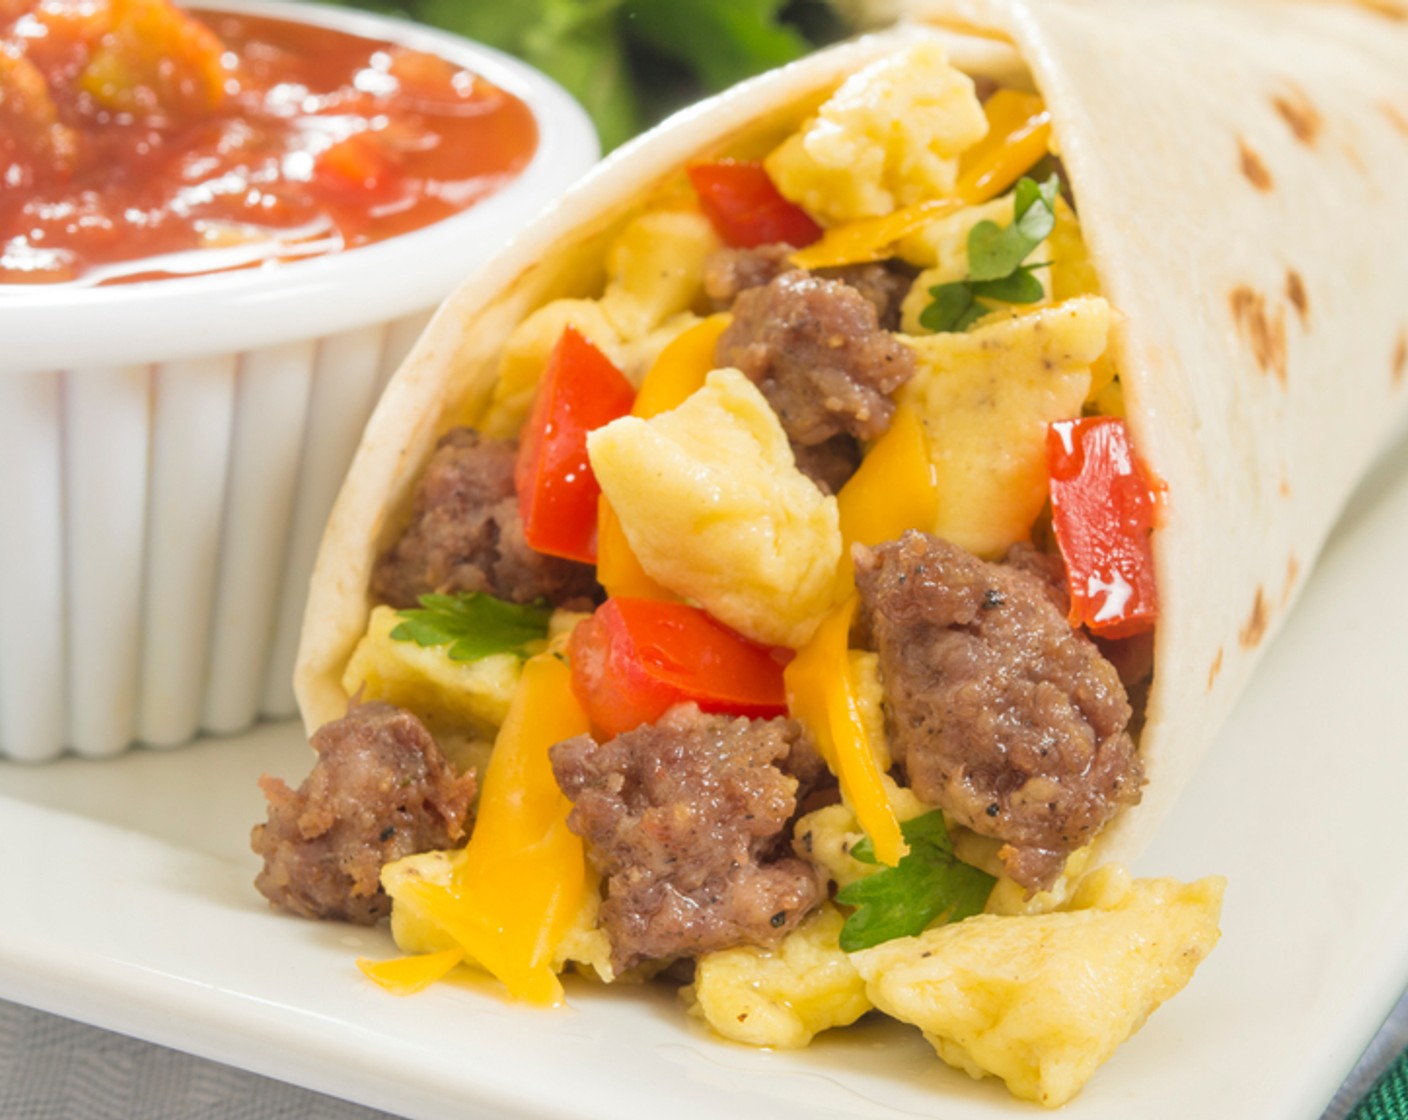 step 5 To assemble your burritos, spread a thin layer of Fat-Free Sour Cream (1/4 cup) on each tortilla and top with even amounts of all ingredients: eggs, peppers and onions, sausage, Shredded Reduced-Fat Cheddar Cheese (1/2 cup) and Salsa (1/2 cup). Roll and serve.